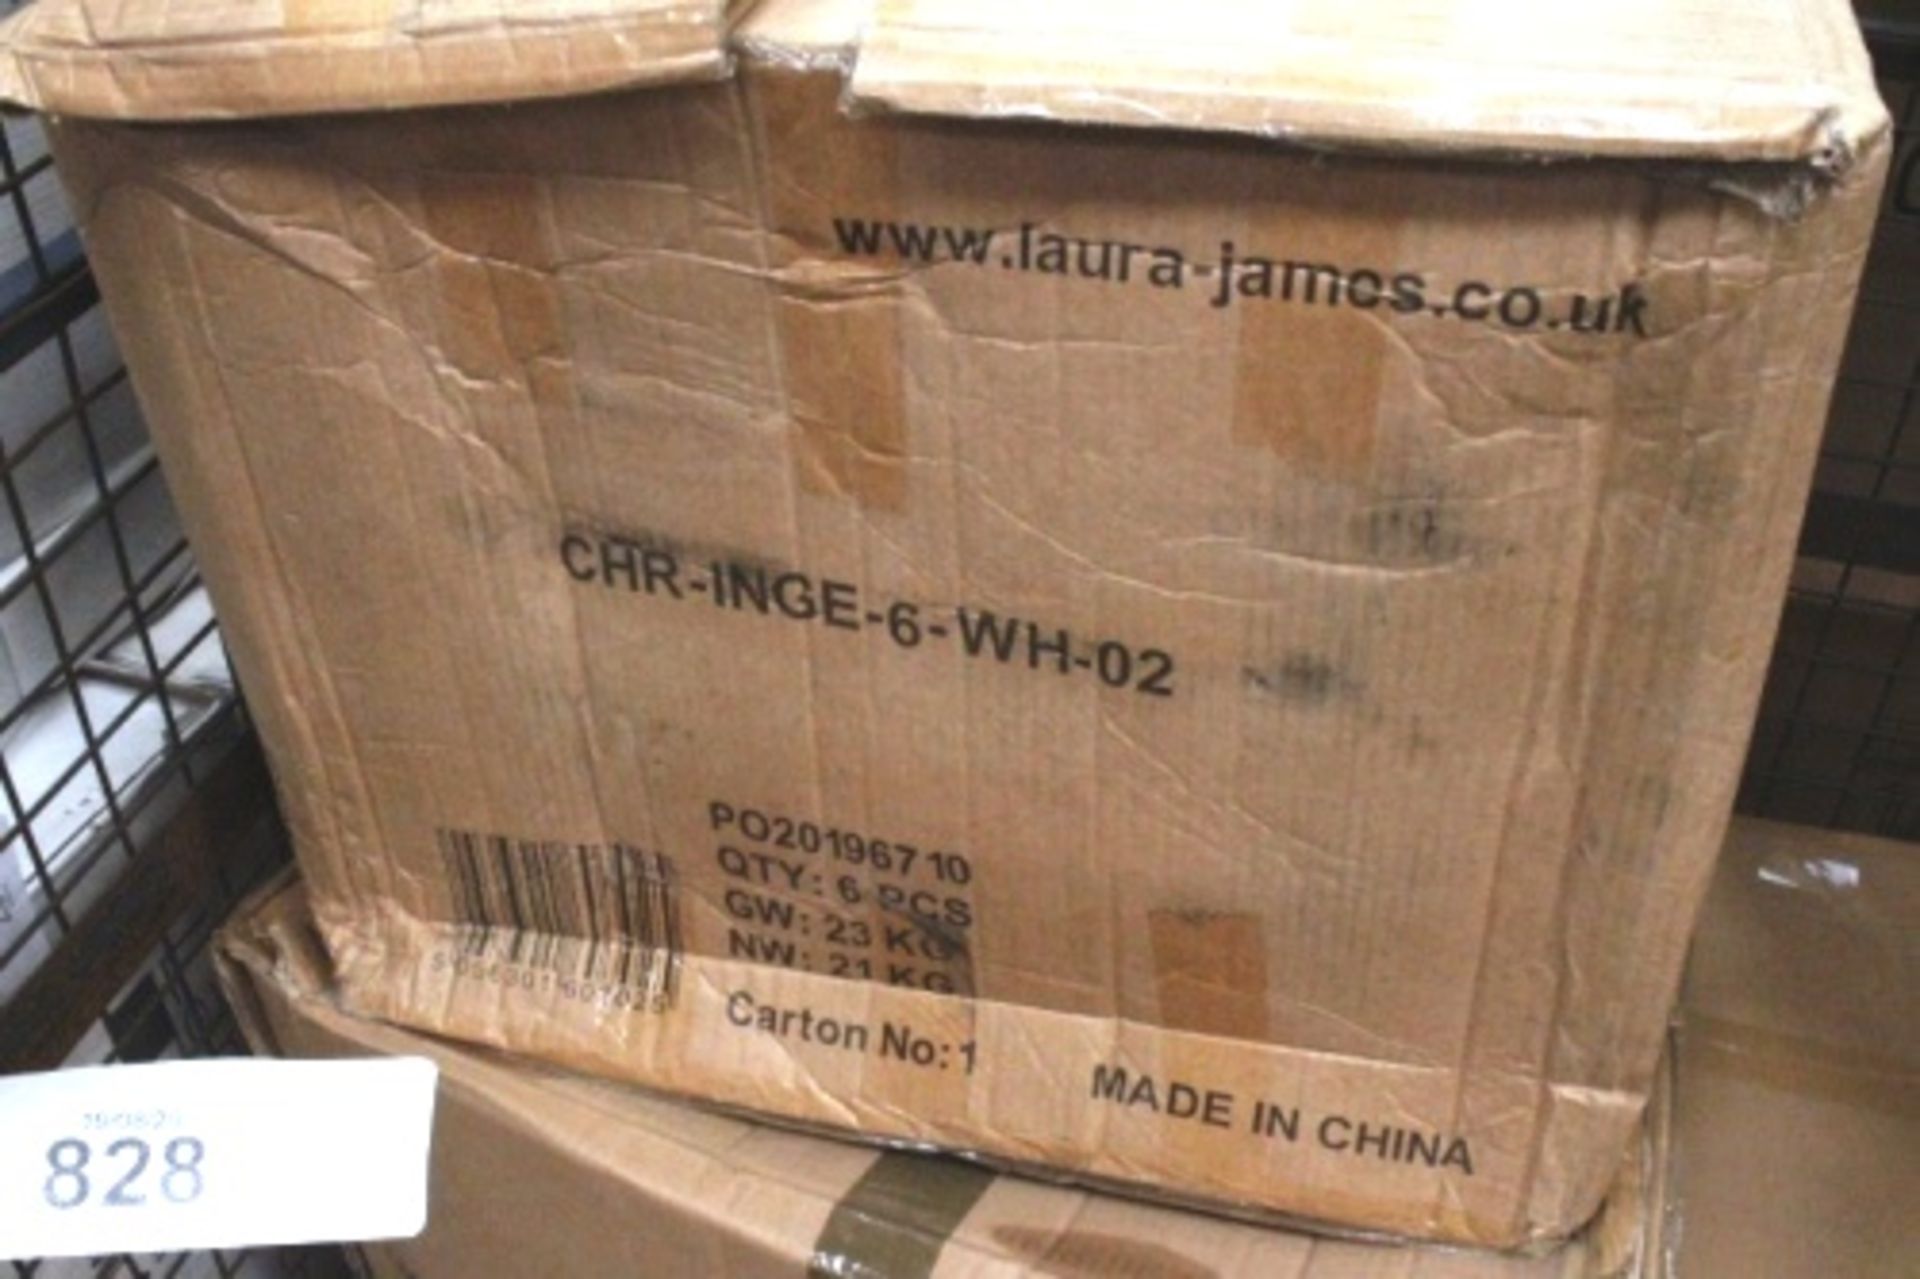 1 x carton containing 6 x Laura James white dining chairs, model CHR-INGE-6-WH-02 - New (GSF11) - Image 2 of 2